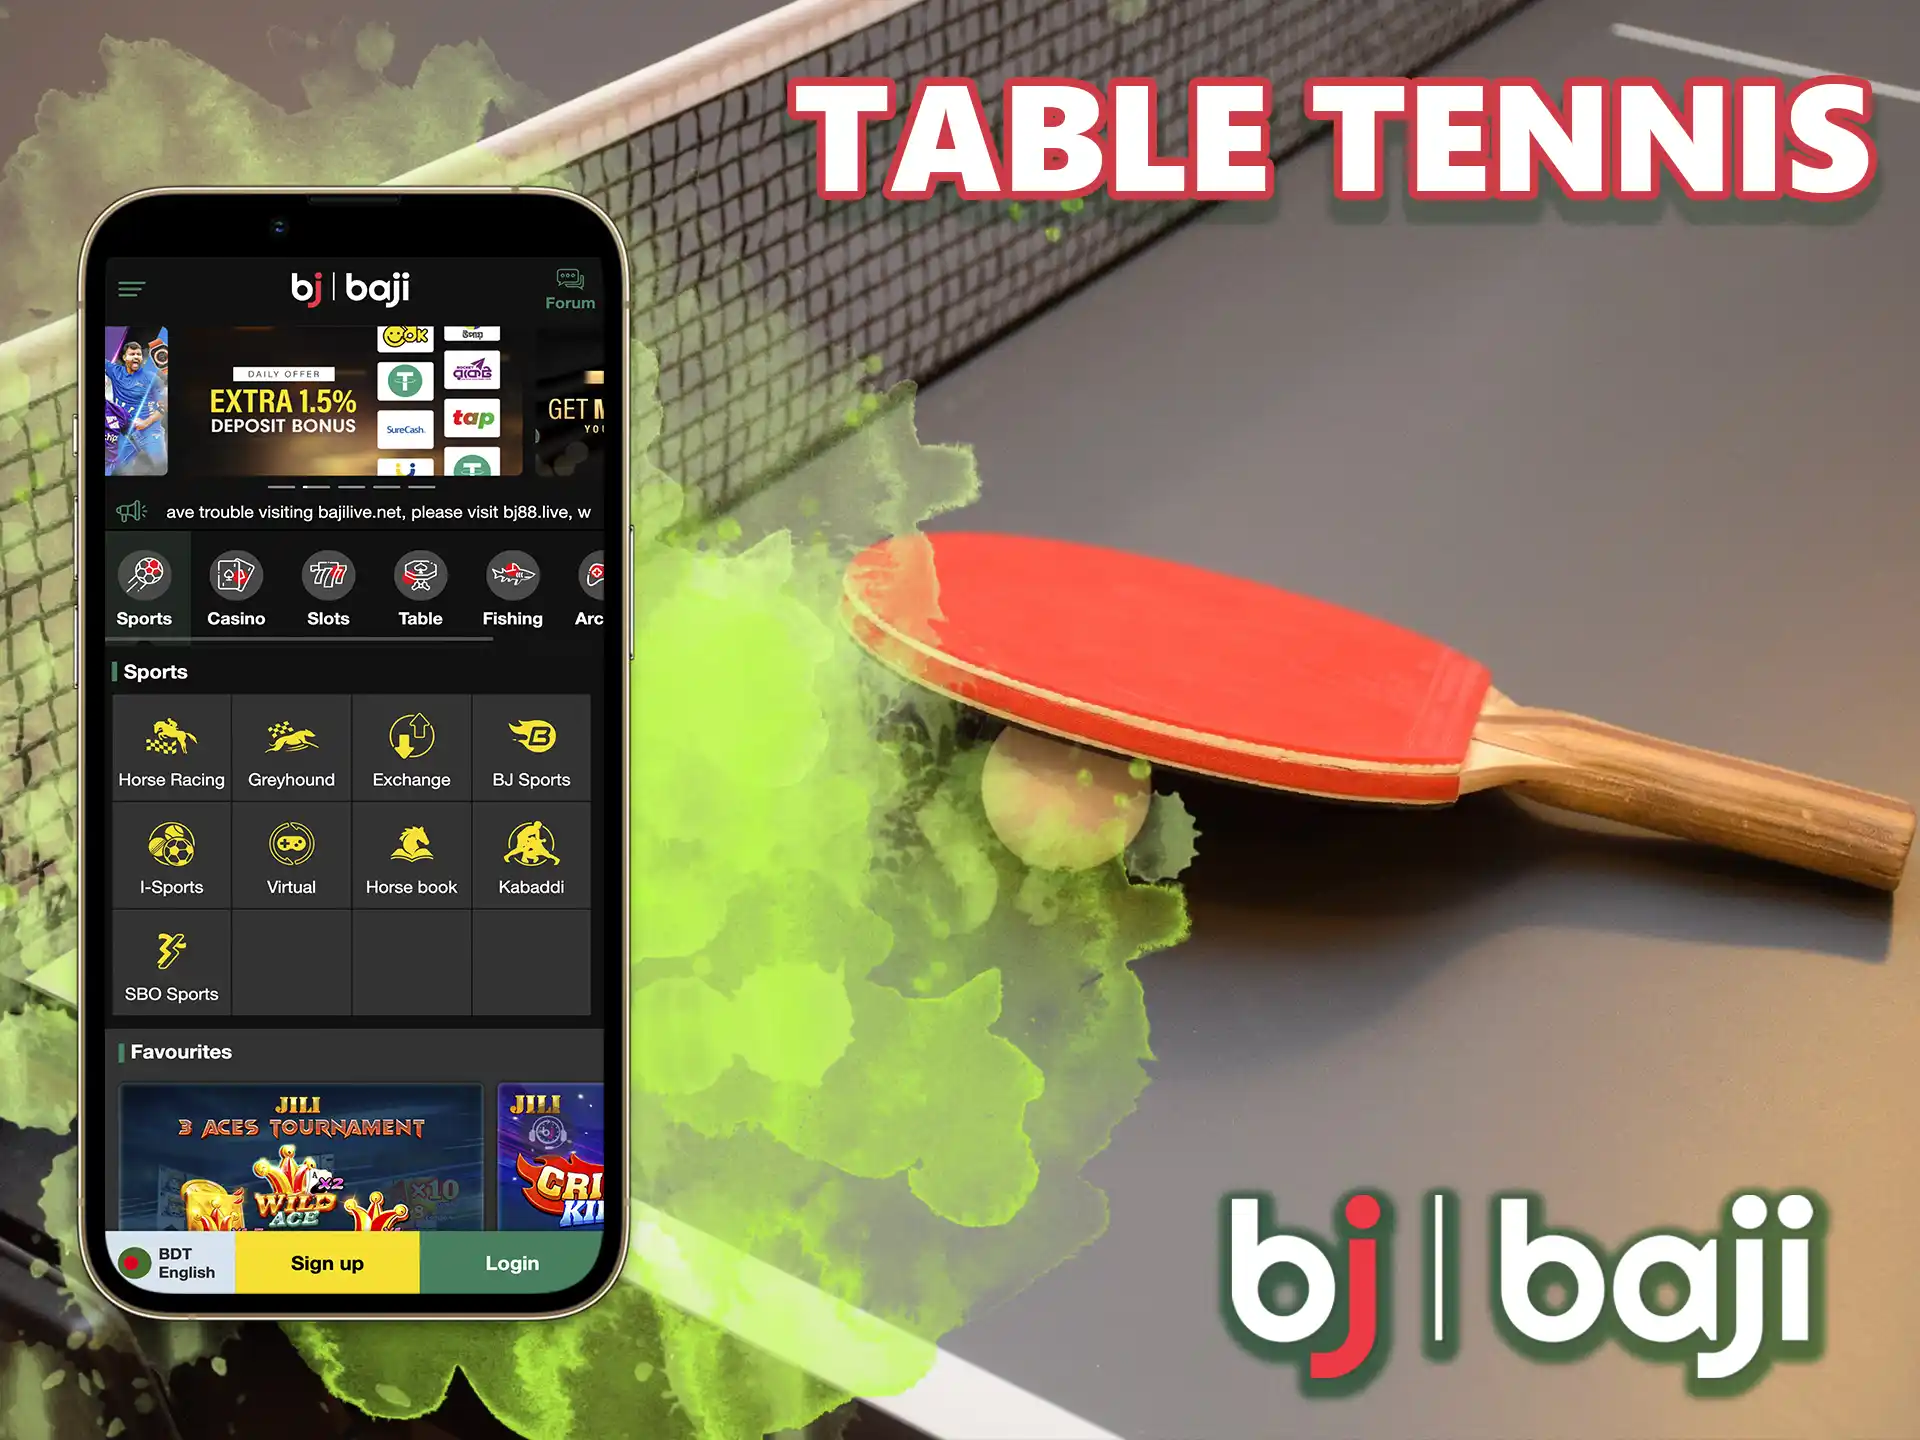 This energetic sport attracts users all over the world, it is waiting for you on the website Baji.